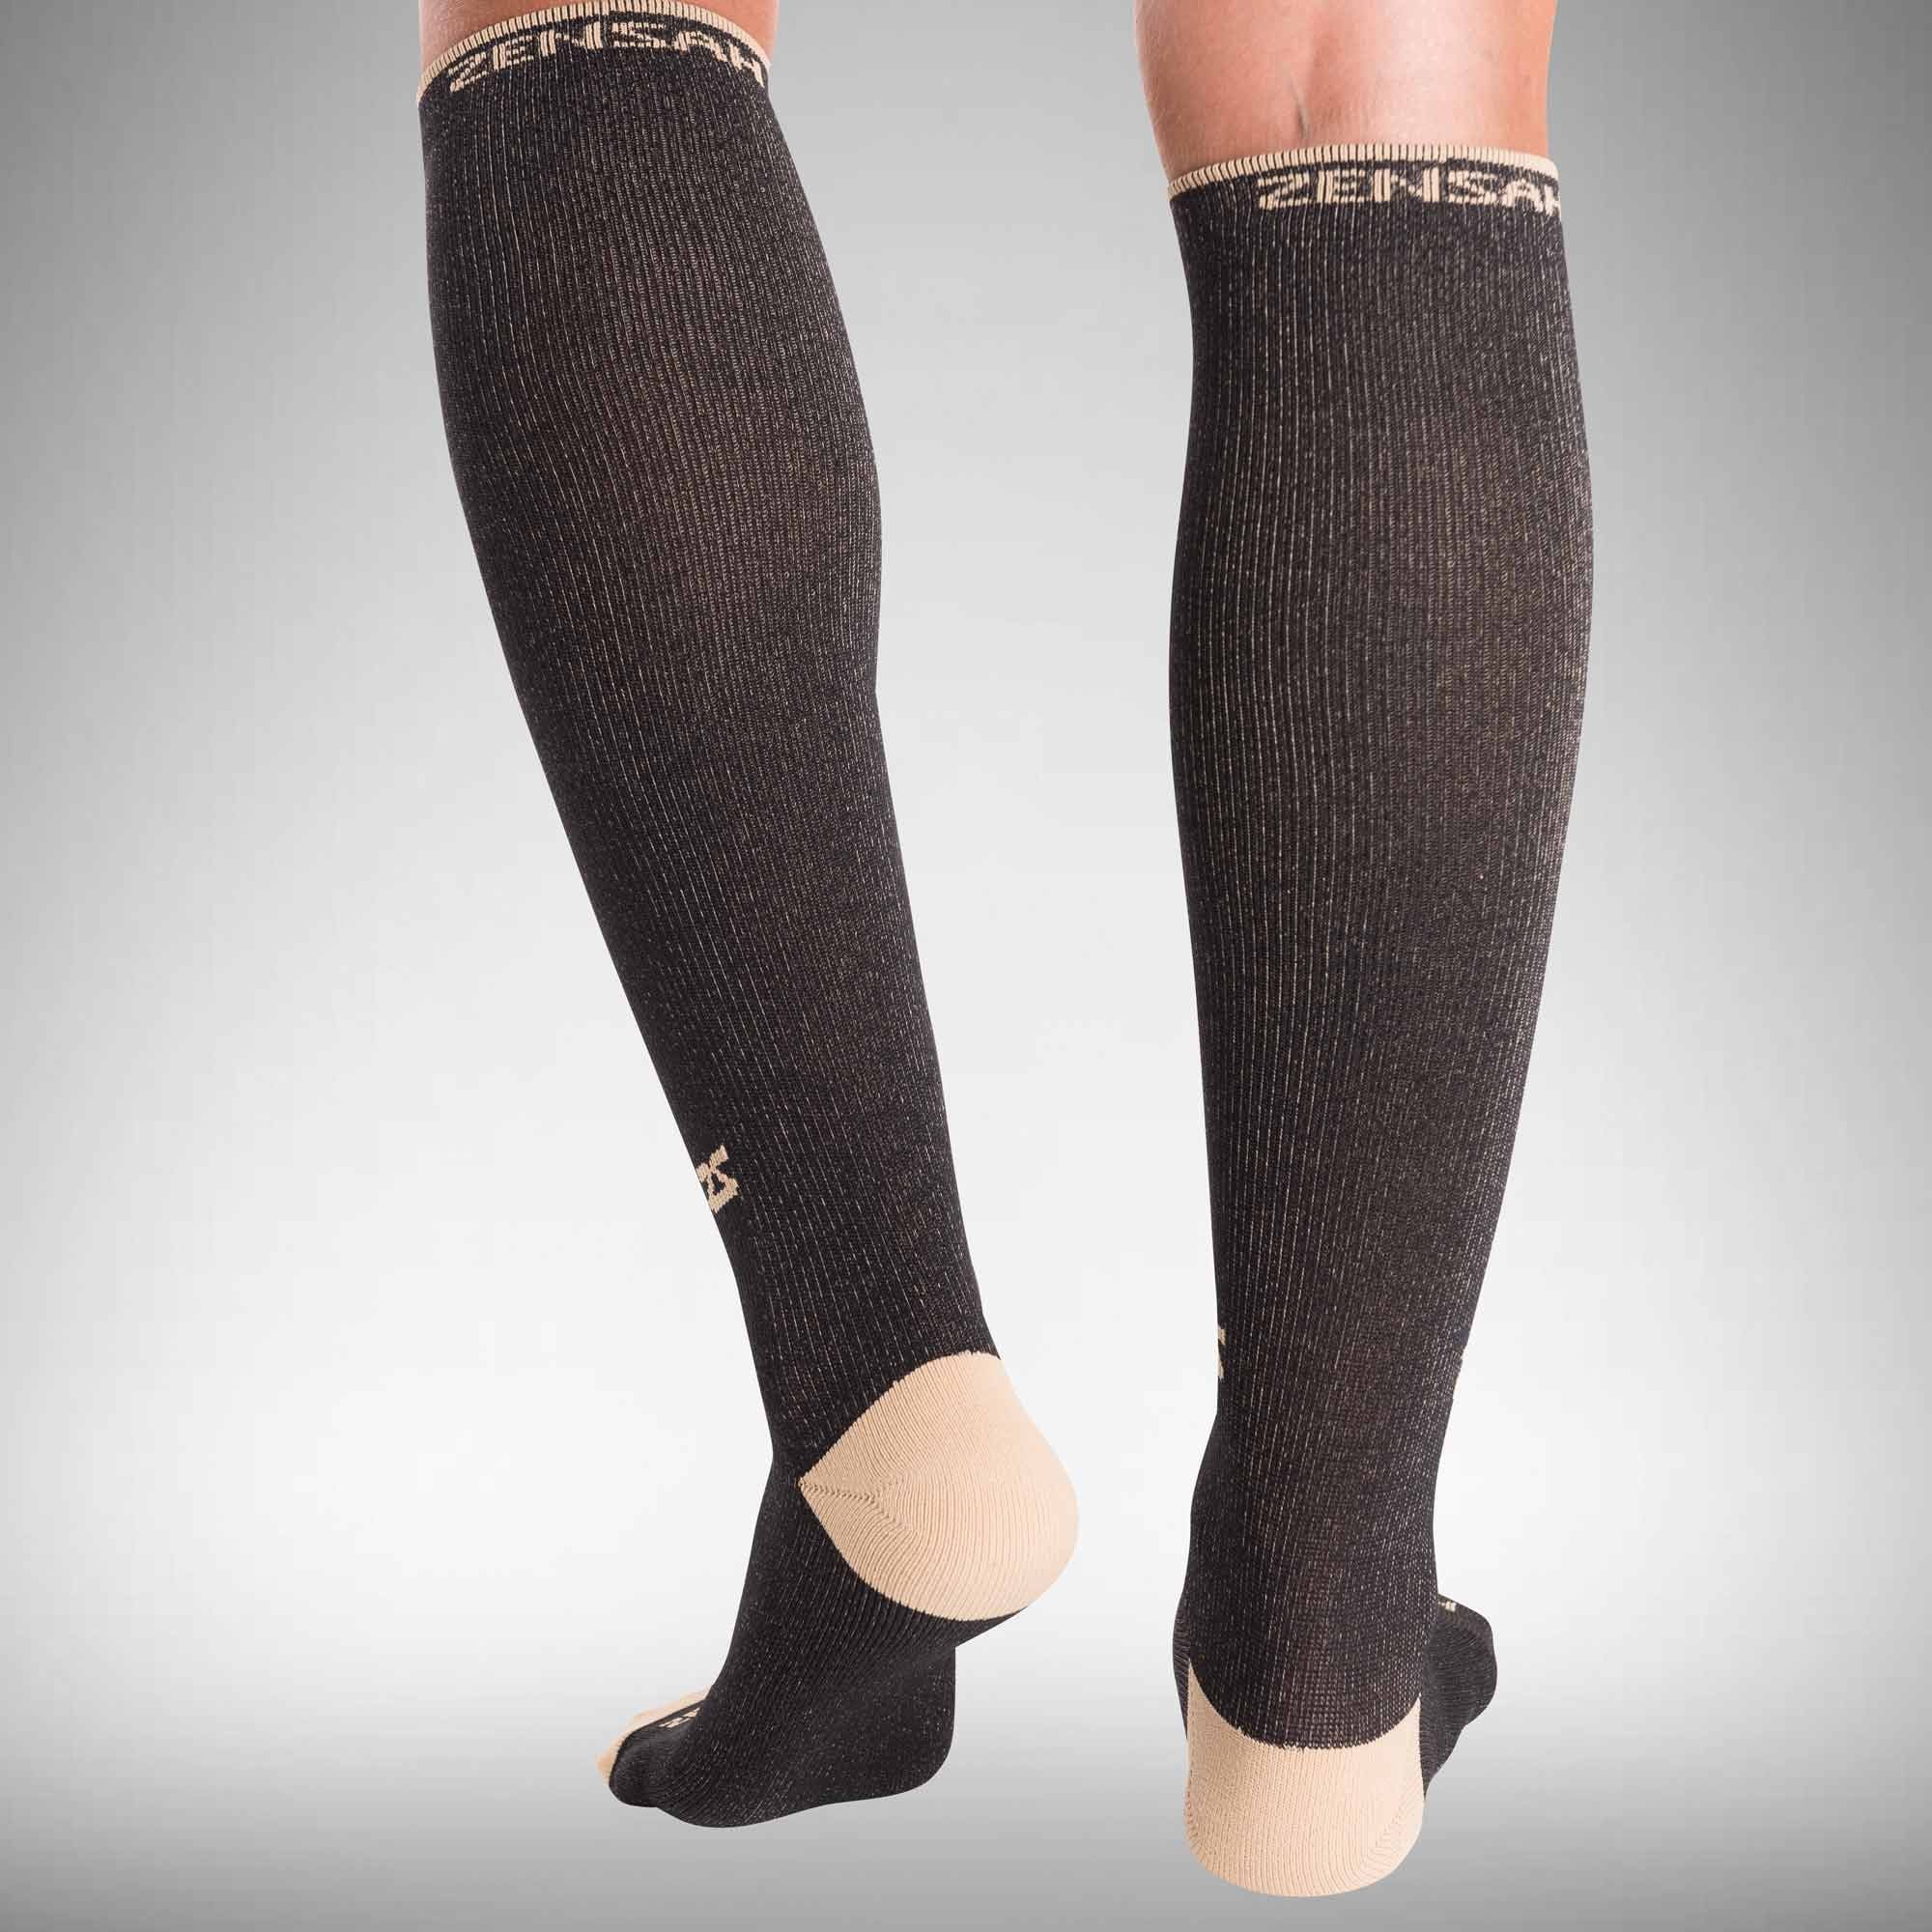  QUXIANG Copper Compression Socks For Women & Men